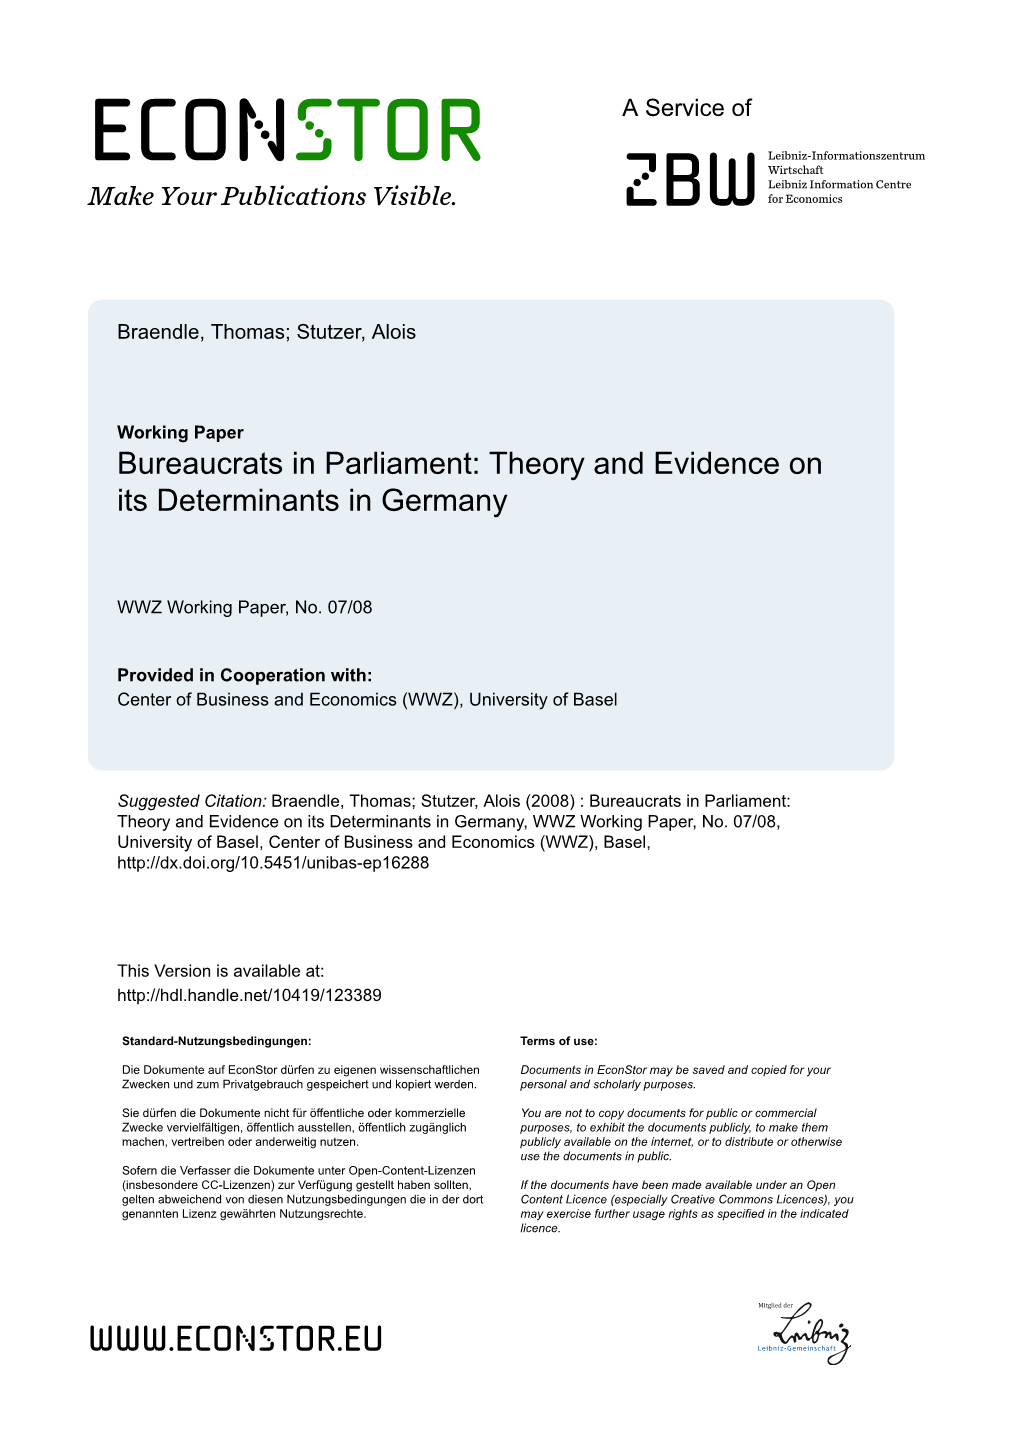 Bureaucrats in Parliament: Theory and Evidence on Its Determinants in Germany